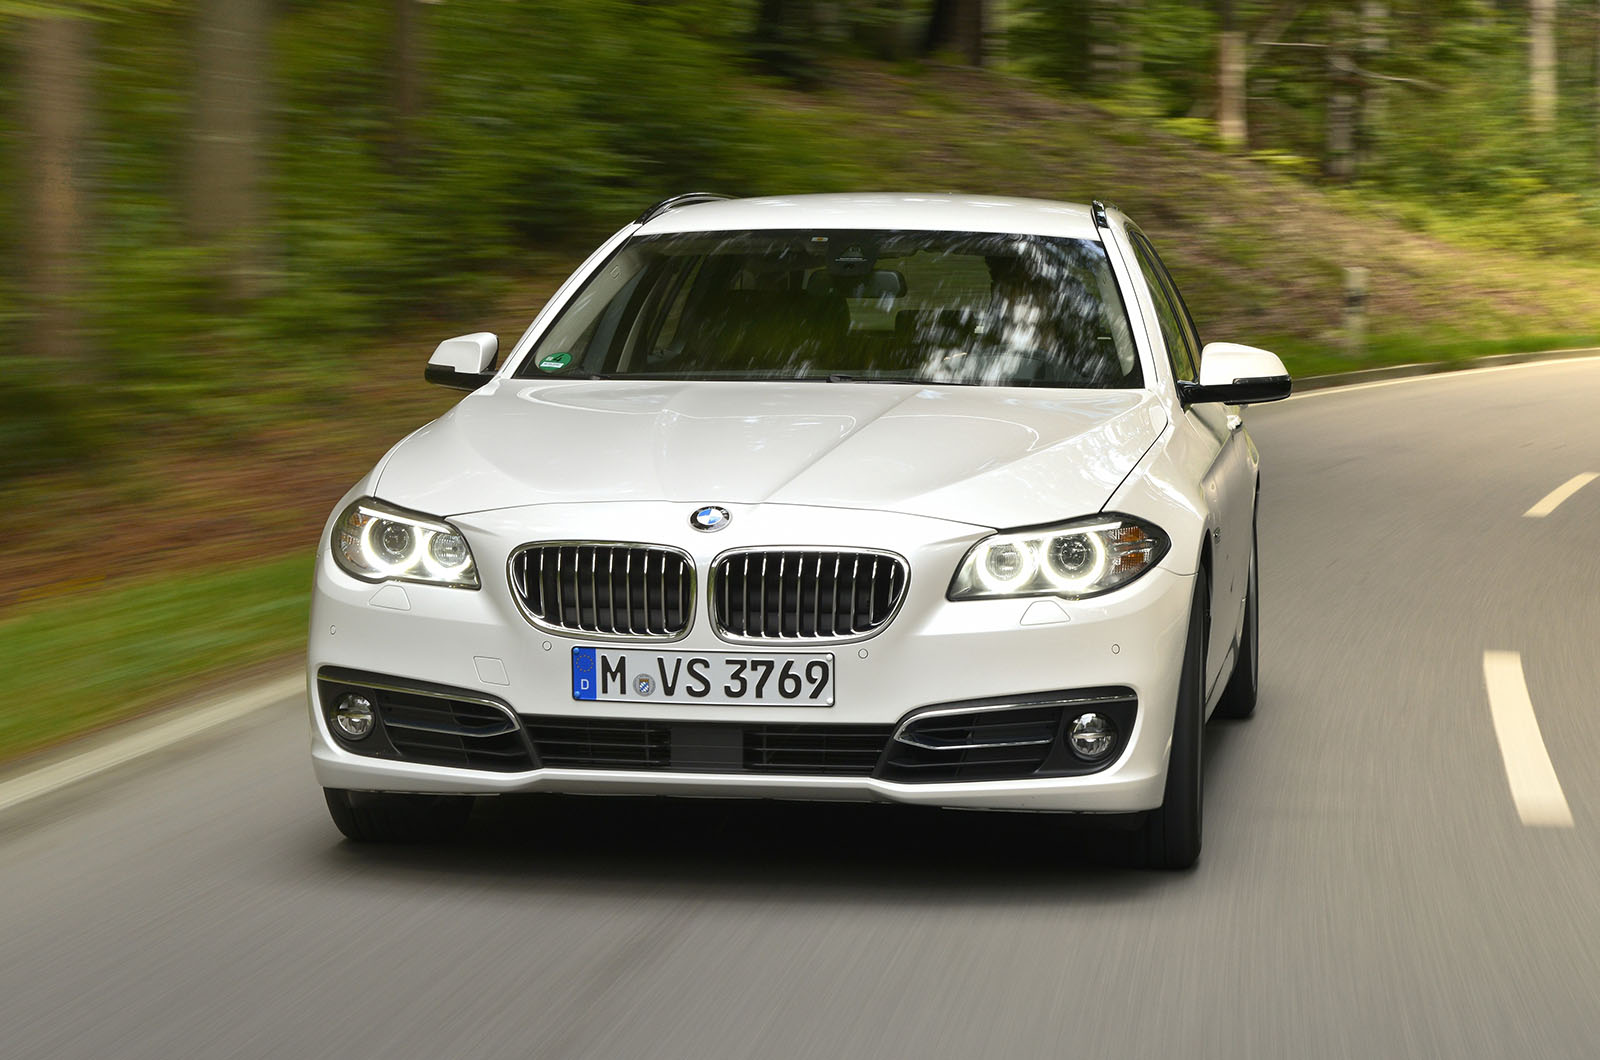 Used bmw 520d touring review #4